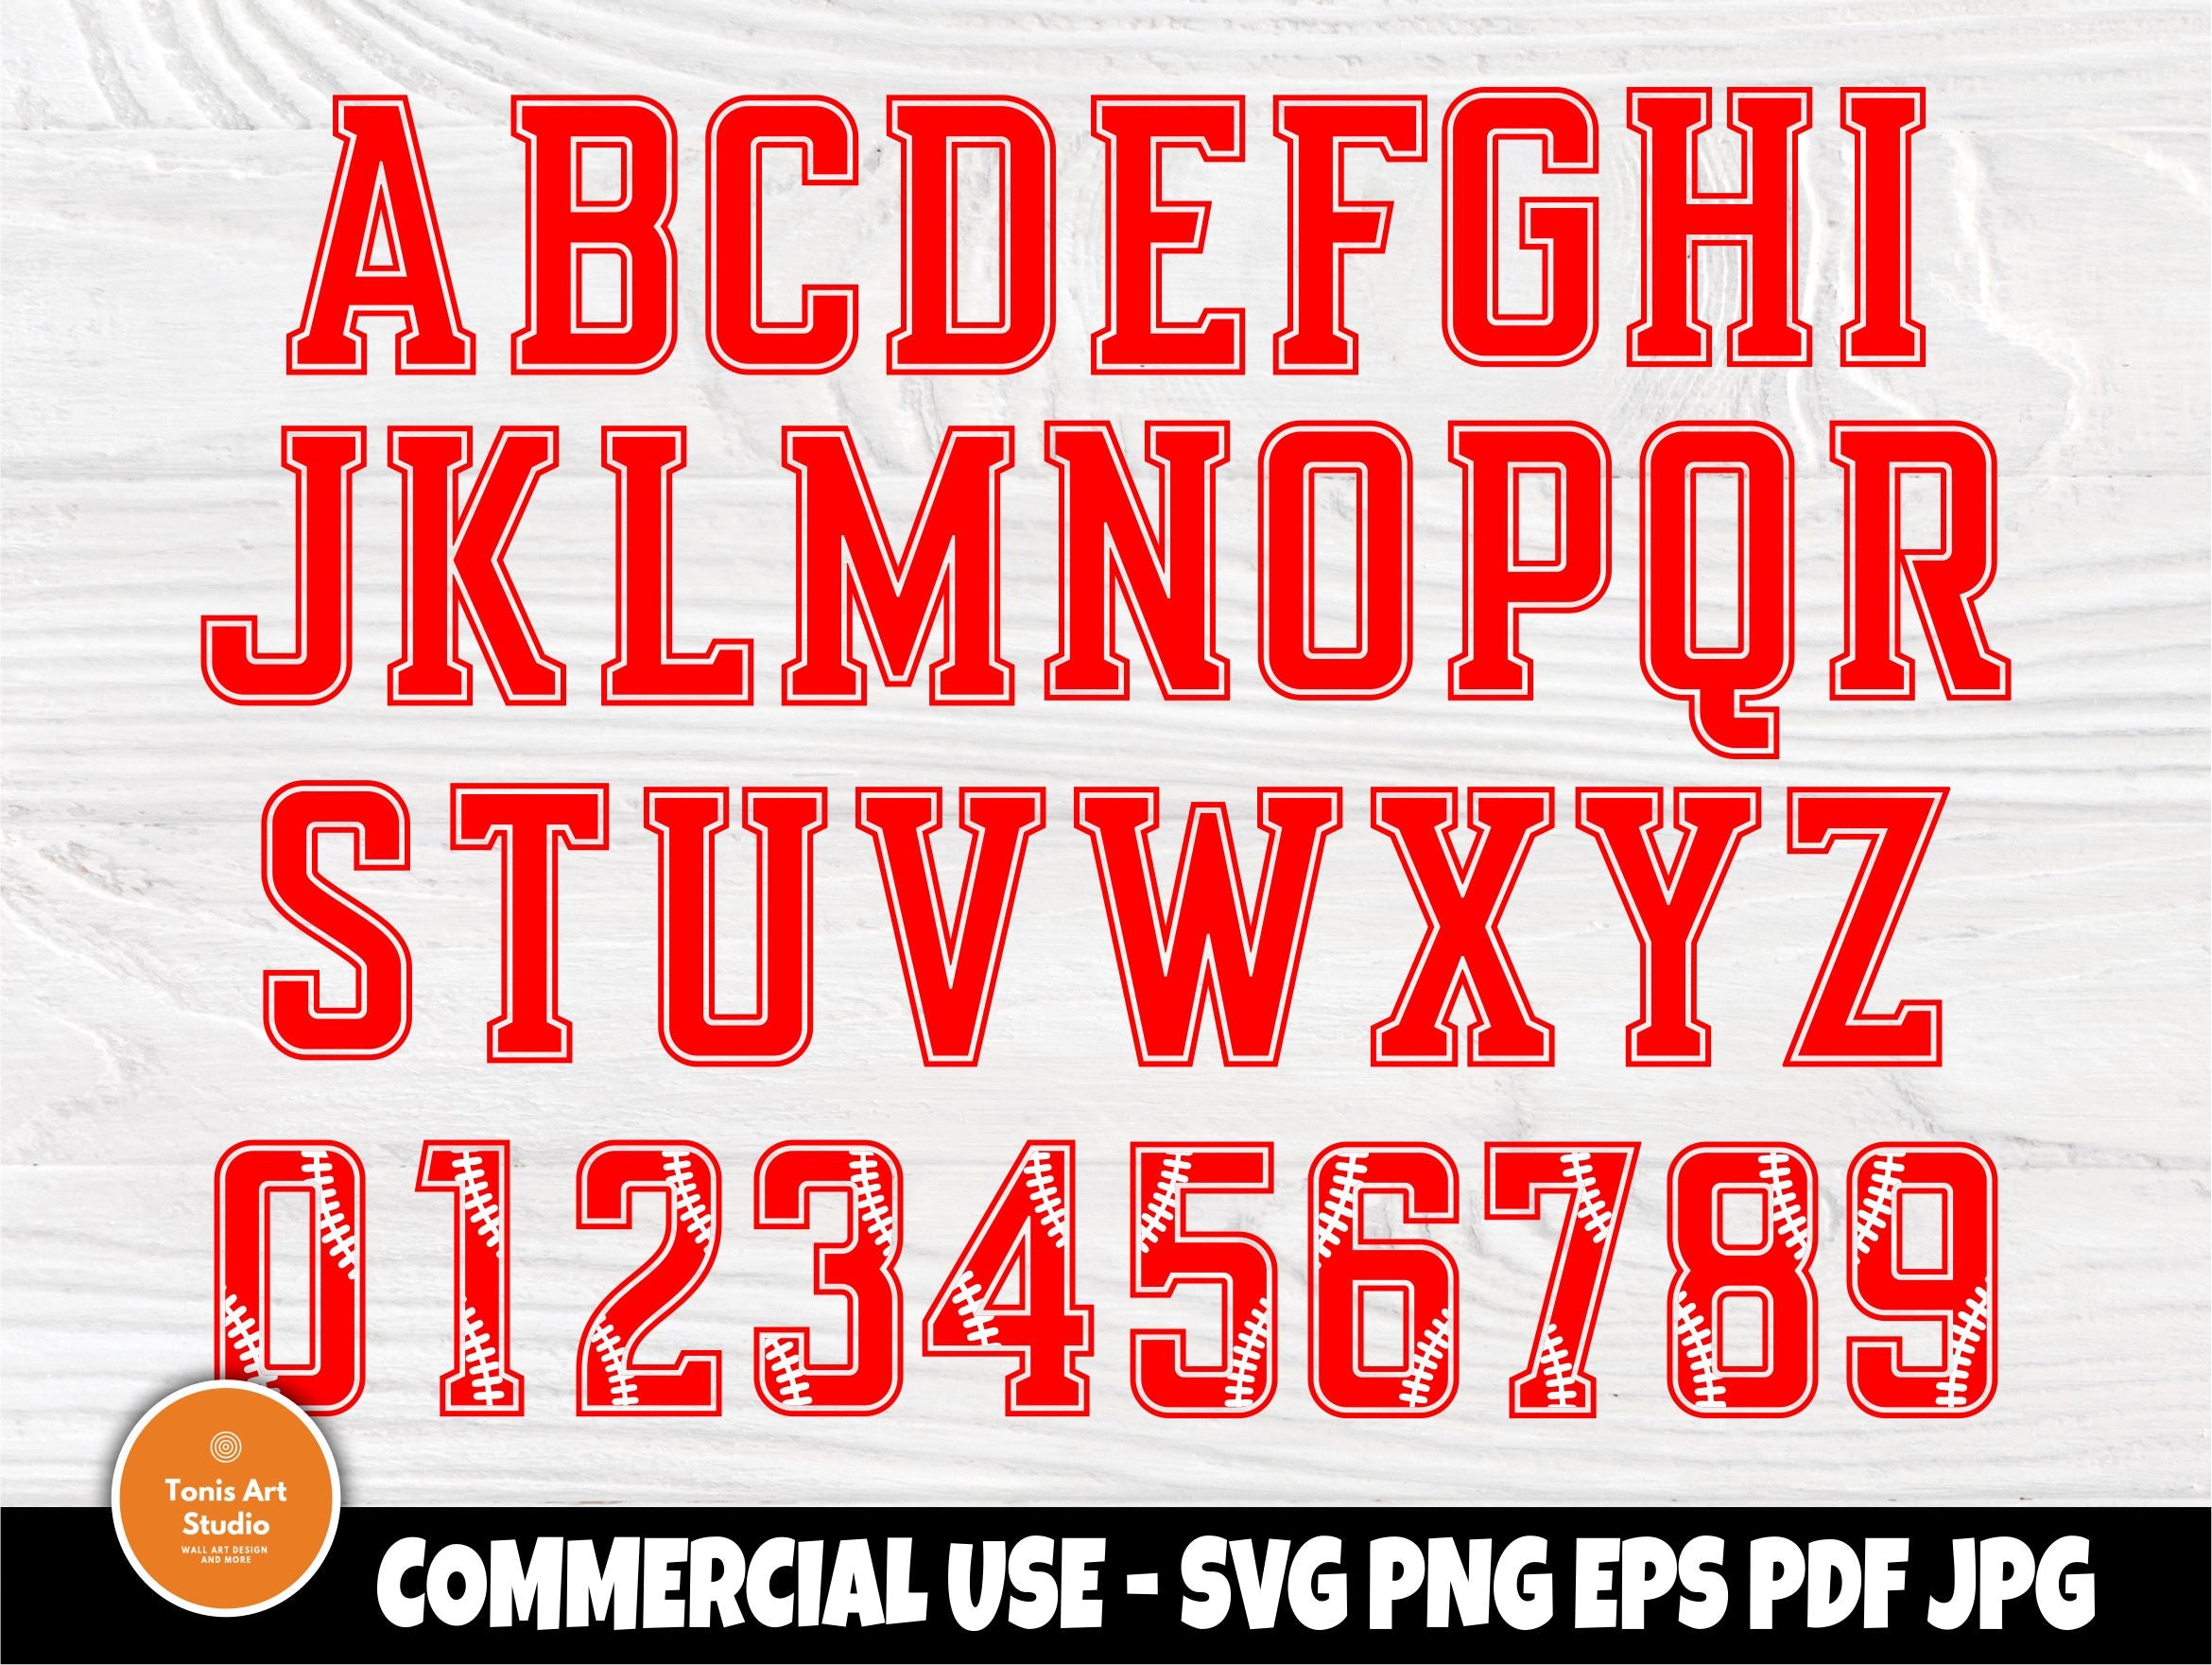 Baseball font SVG Cut Files, Letters & Numbers Svg